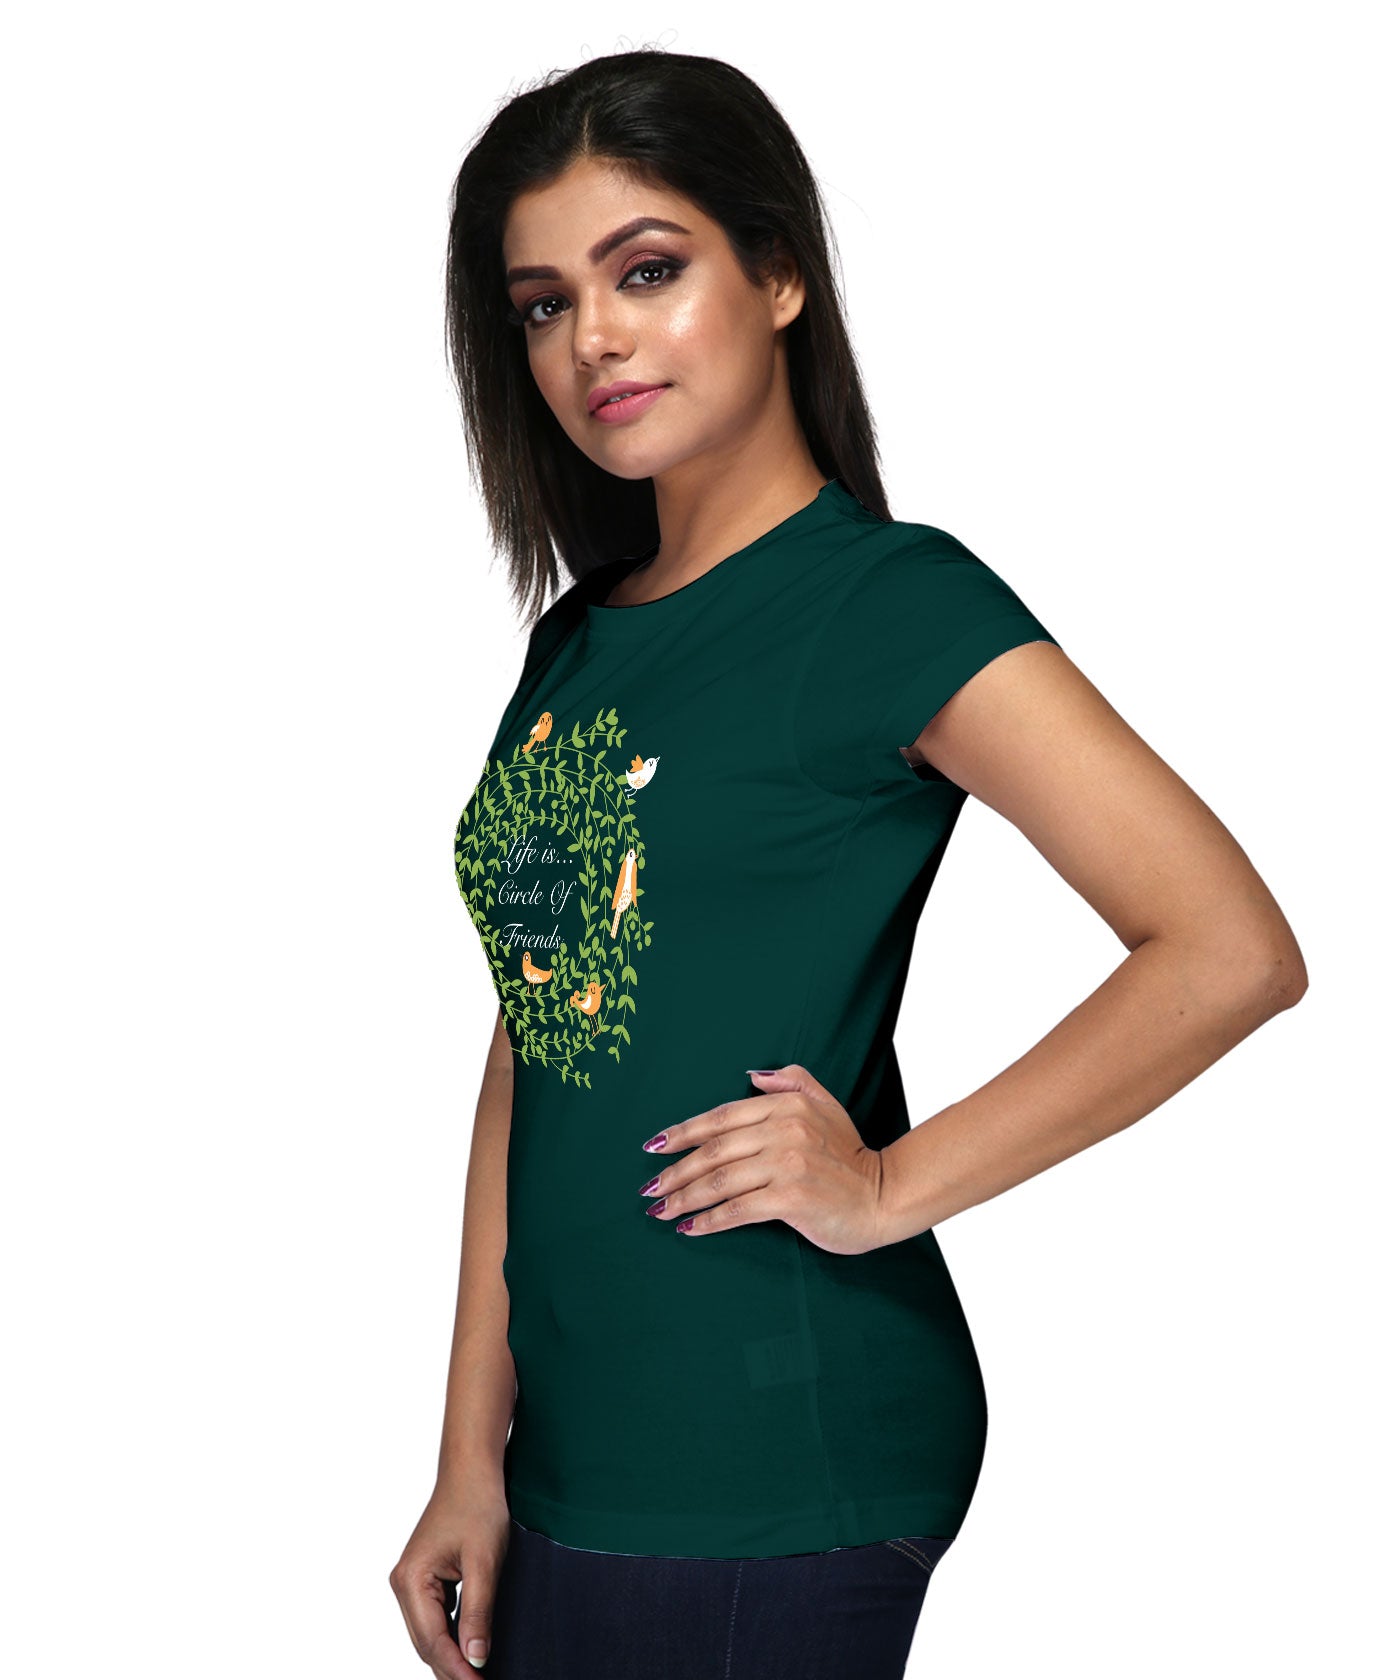 Life is Circle of Friend - Premium Round Neck Cotton Tees for Women - Cactus Green